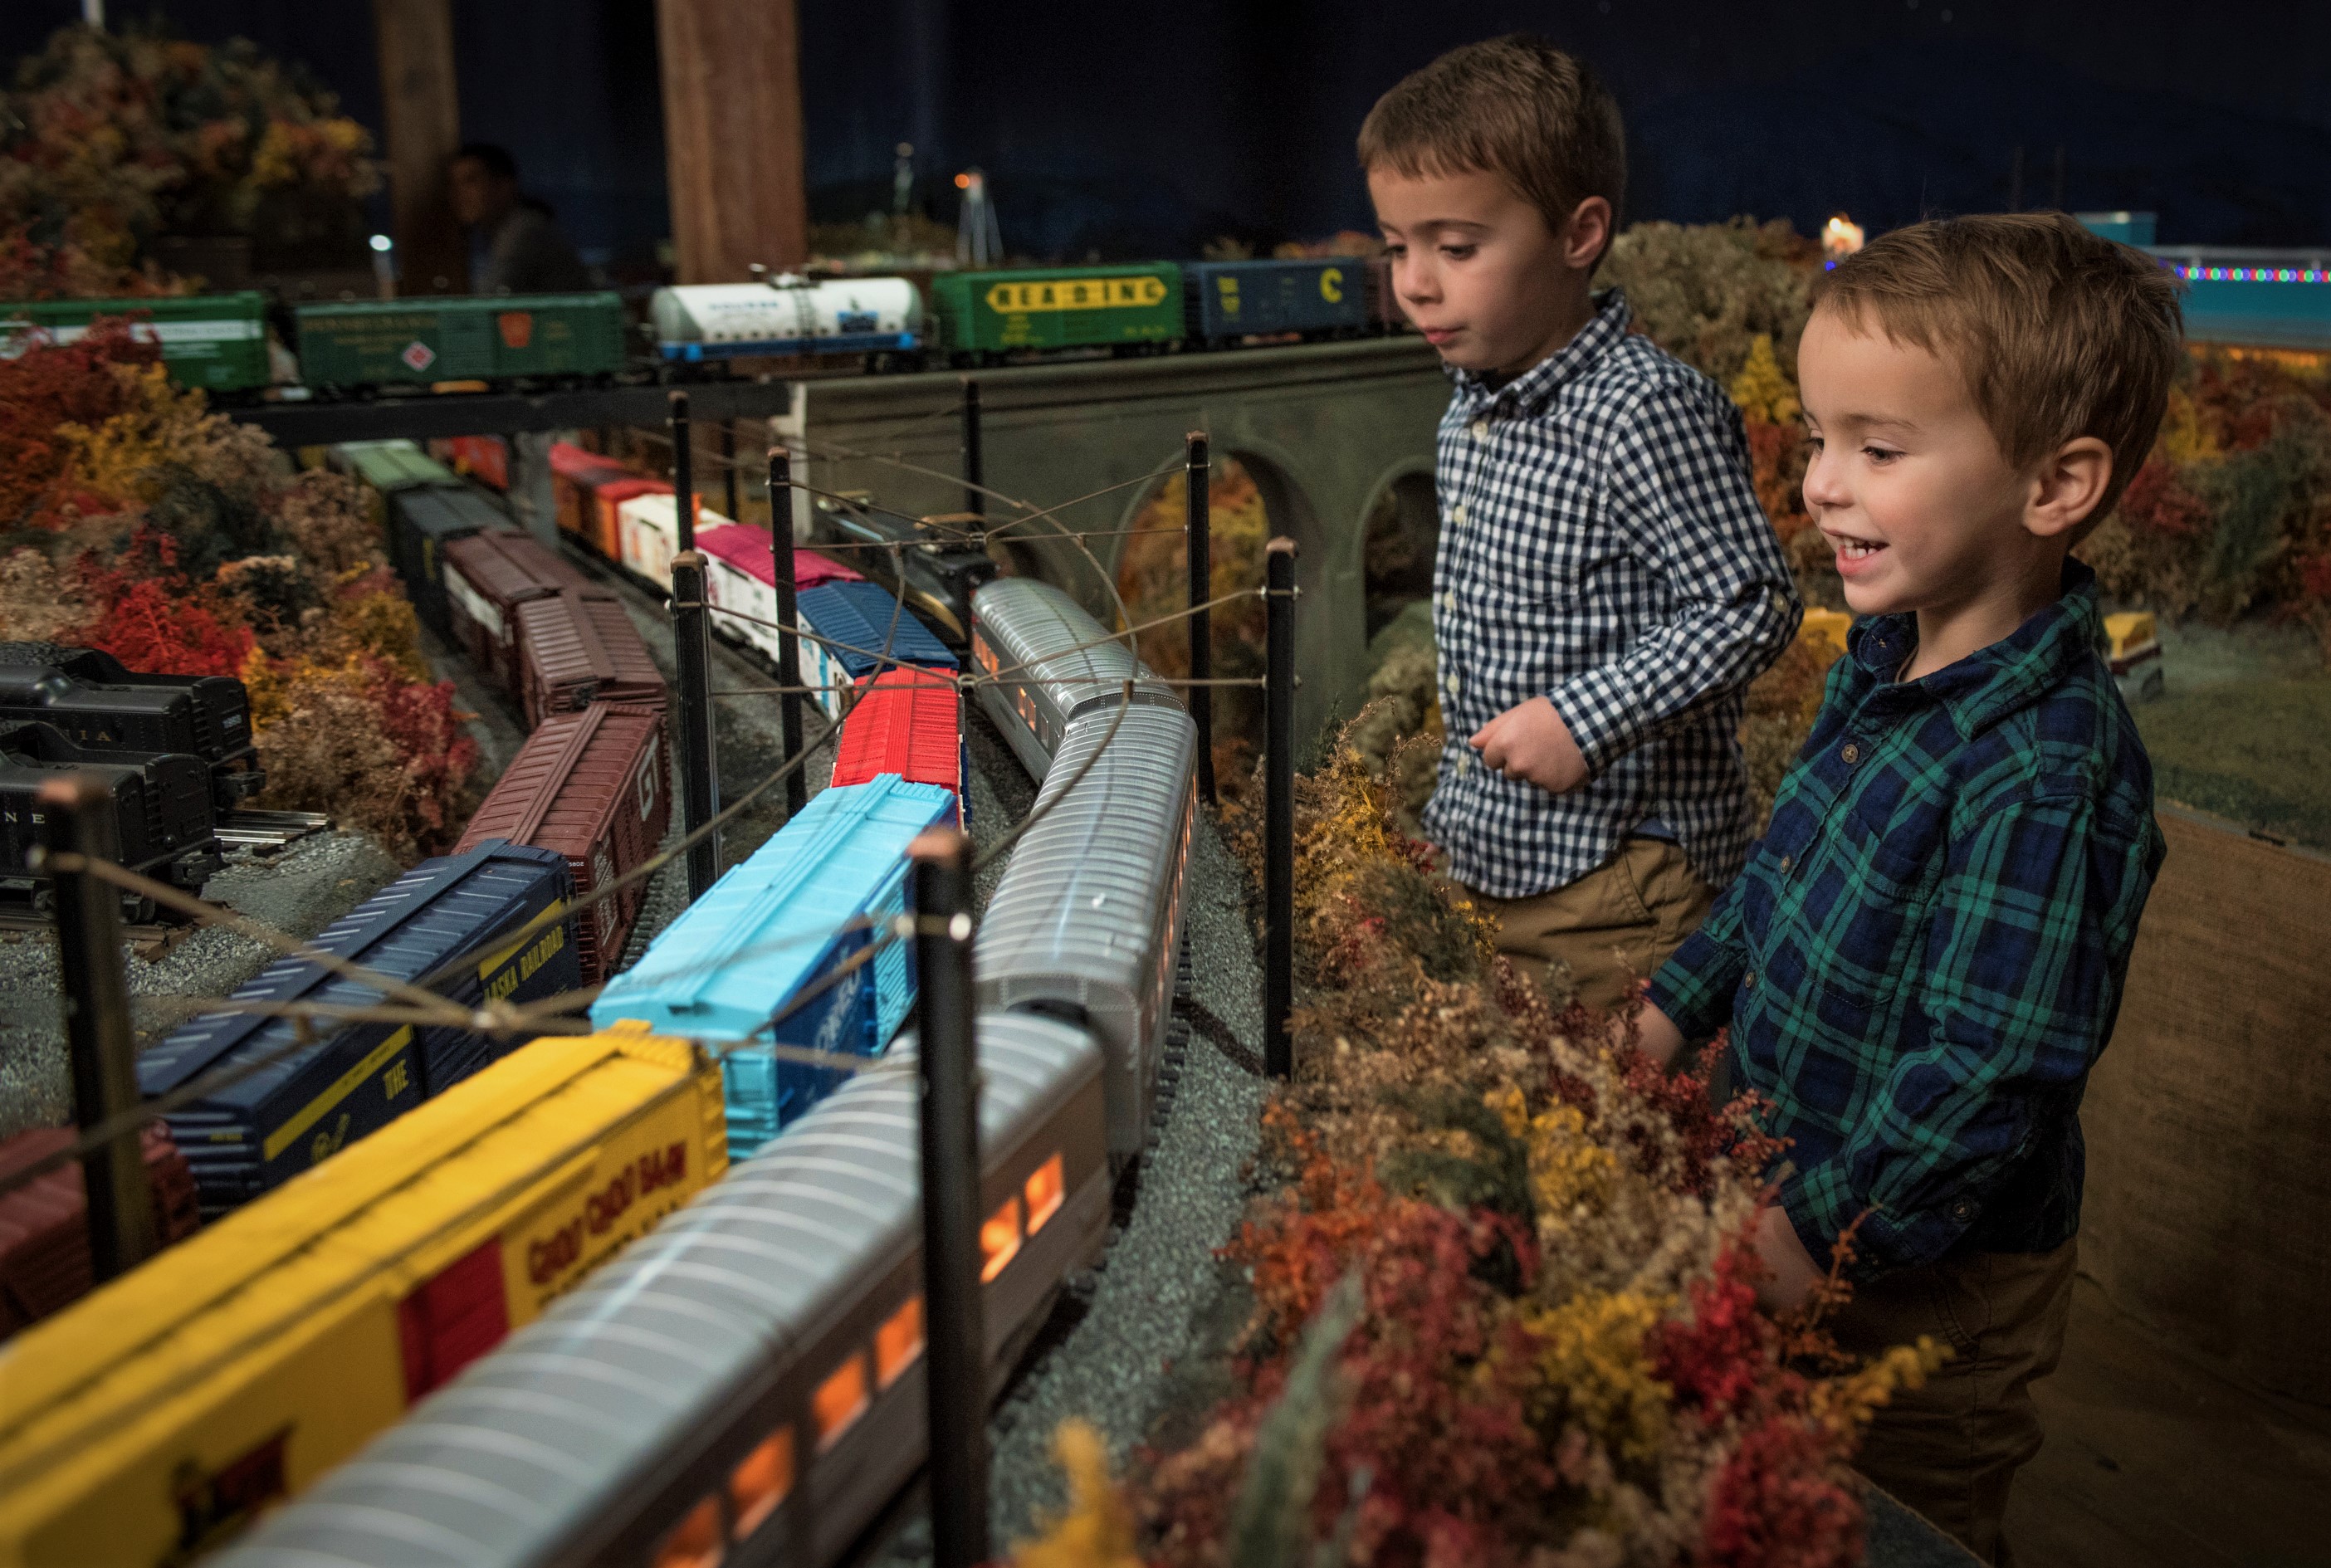 Boys laughing and enjoying the Brandywine Railroad during Brandywine Christmas at the Brandywine River Museum of Art